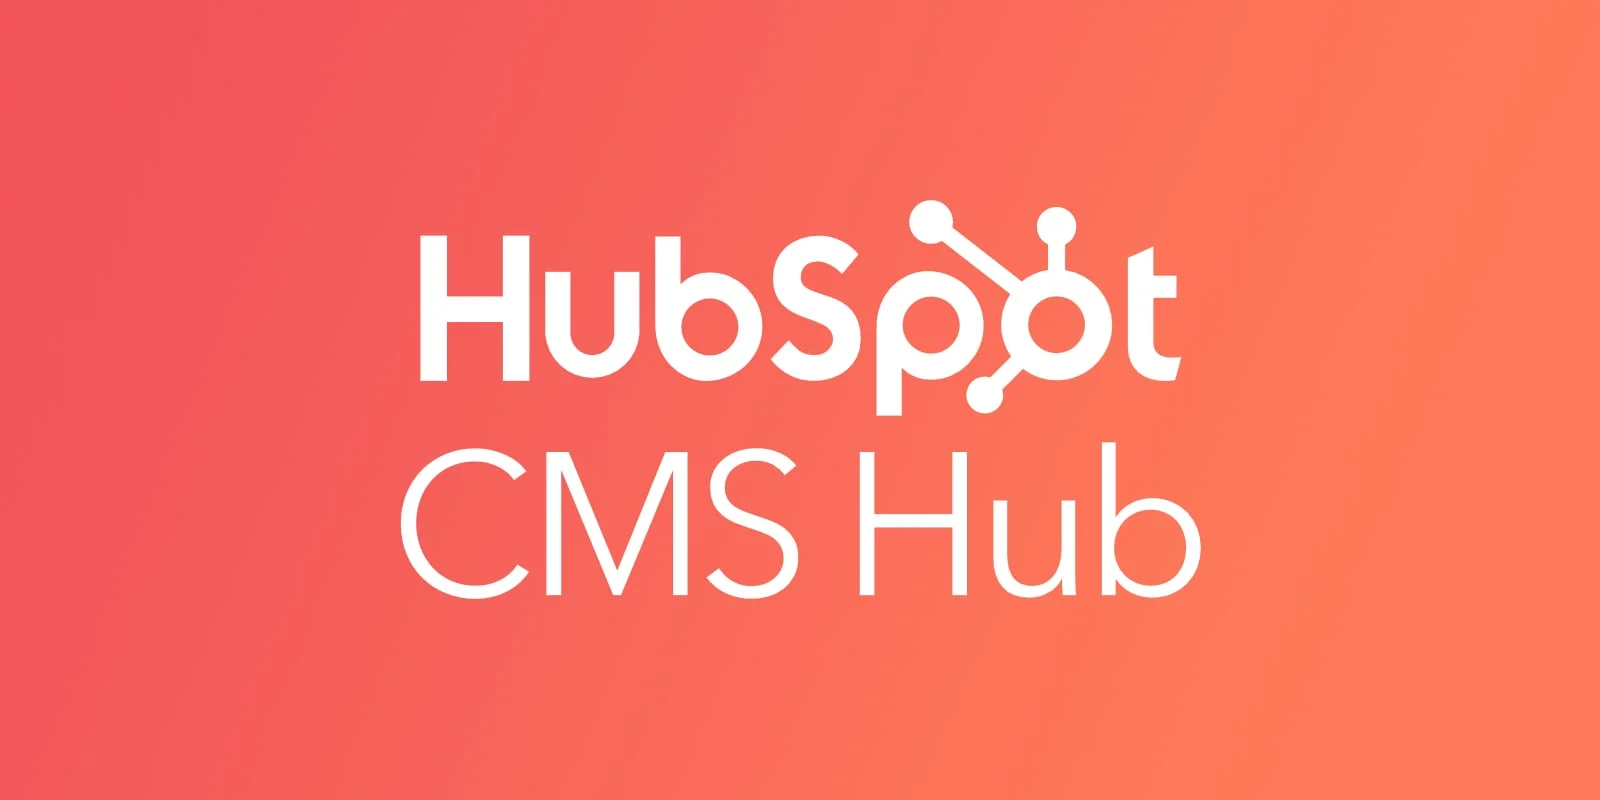 HubSpot launches HubSpot CMS free tools for early stage businesses